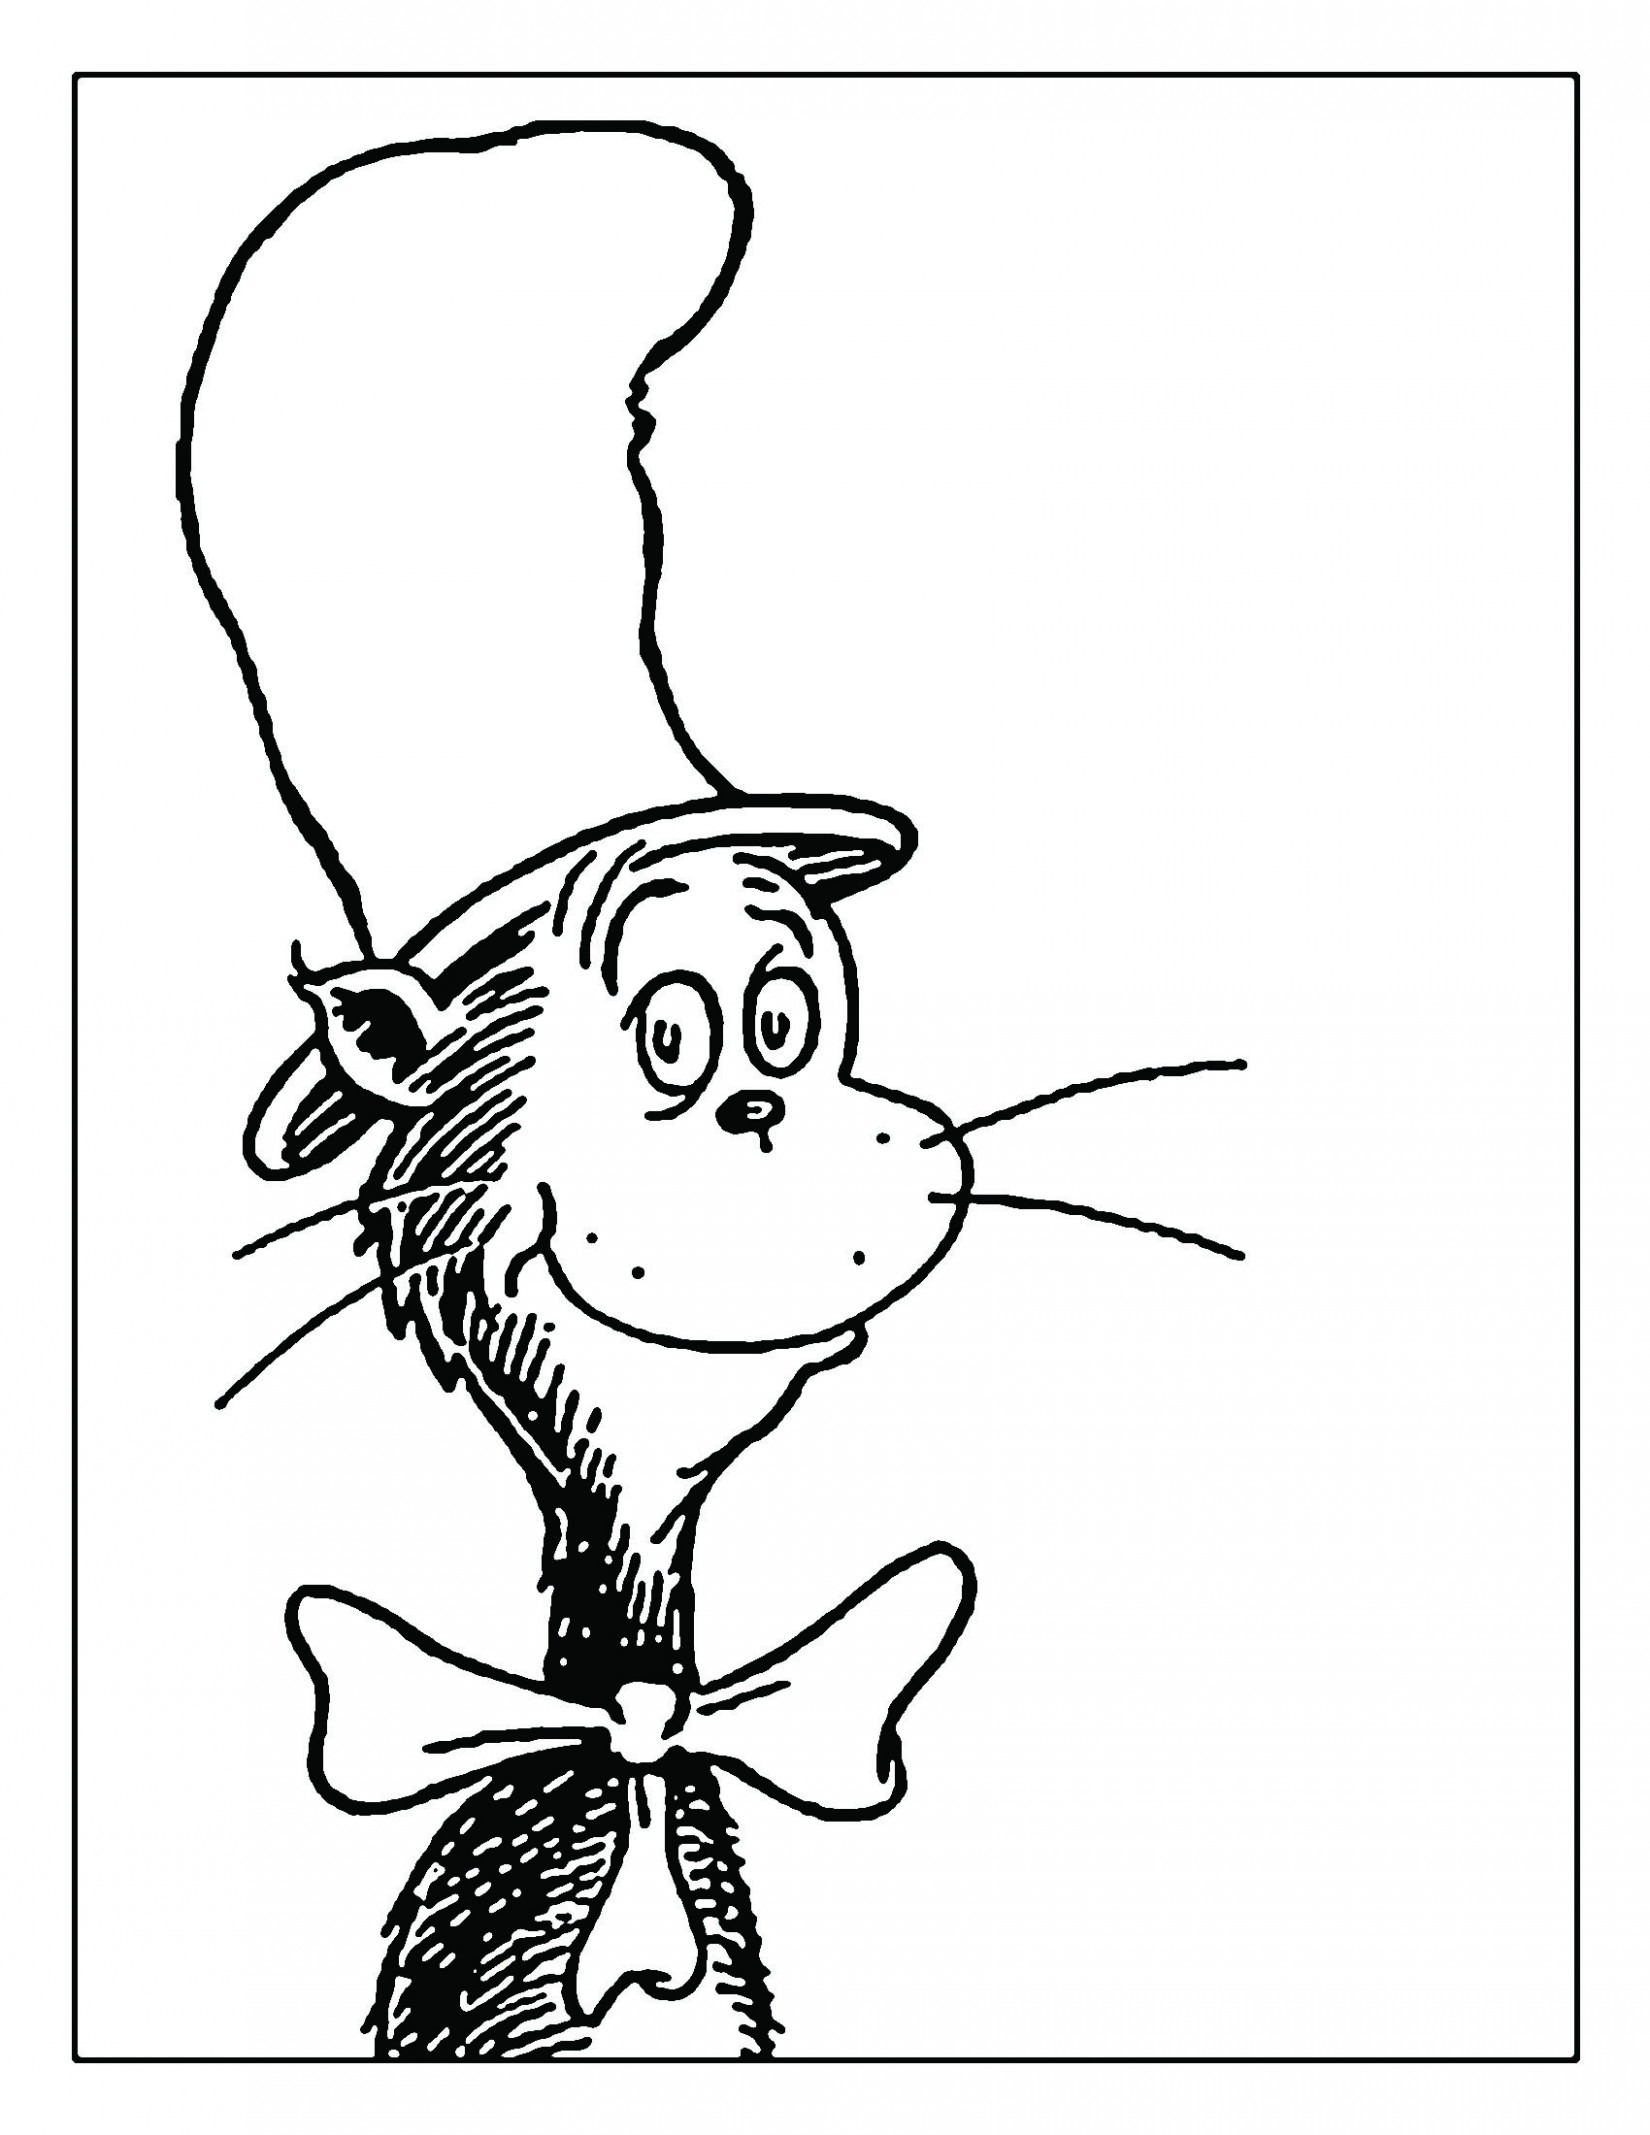 Dr Seuss Horton Hears A Who Coloring Pages at GetColorings ...